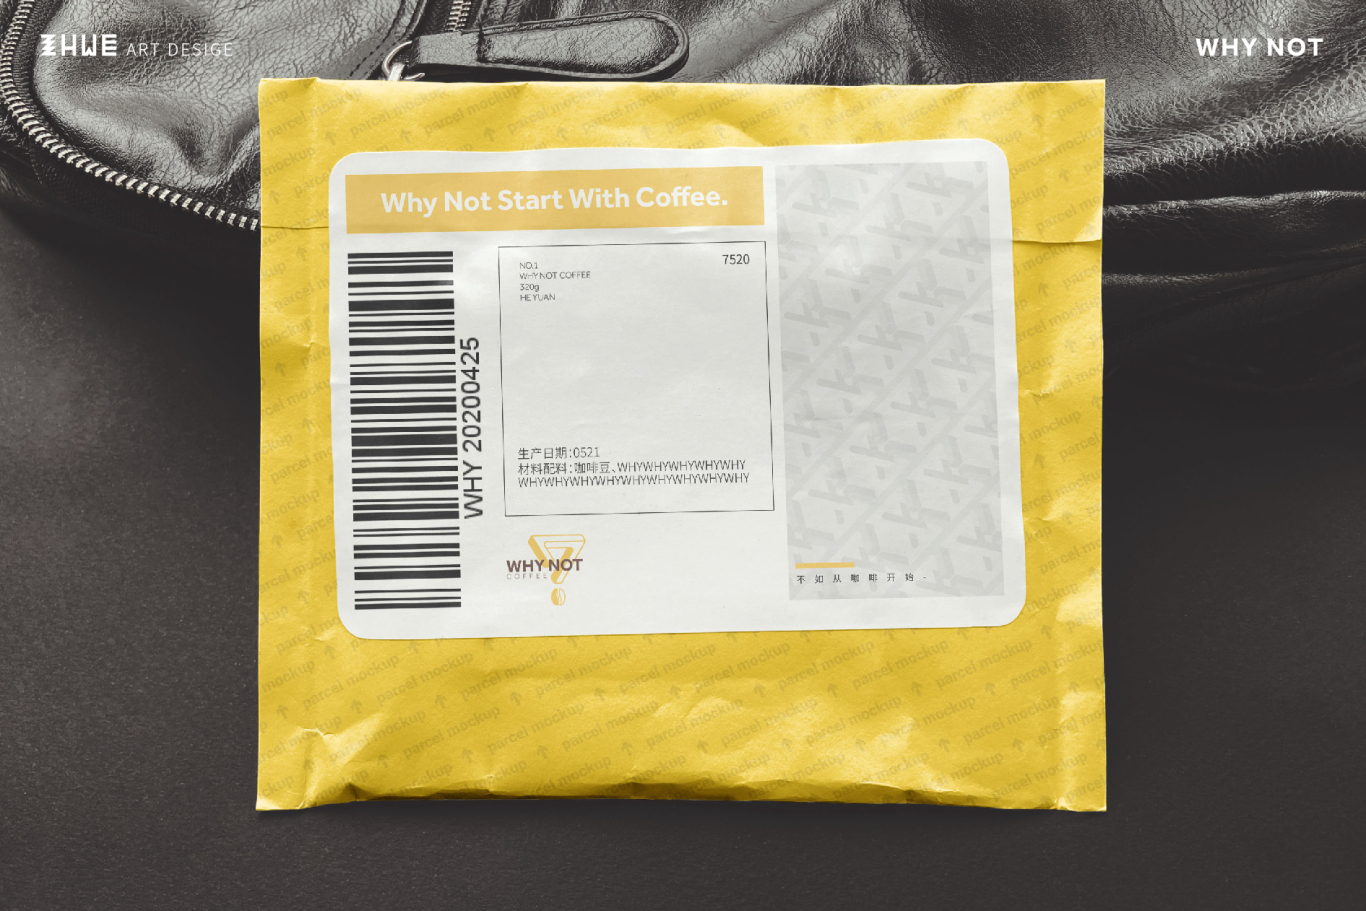 WHY NOT COFFEE 咖啡LOGO设计图14